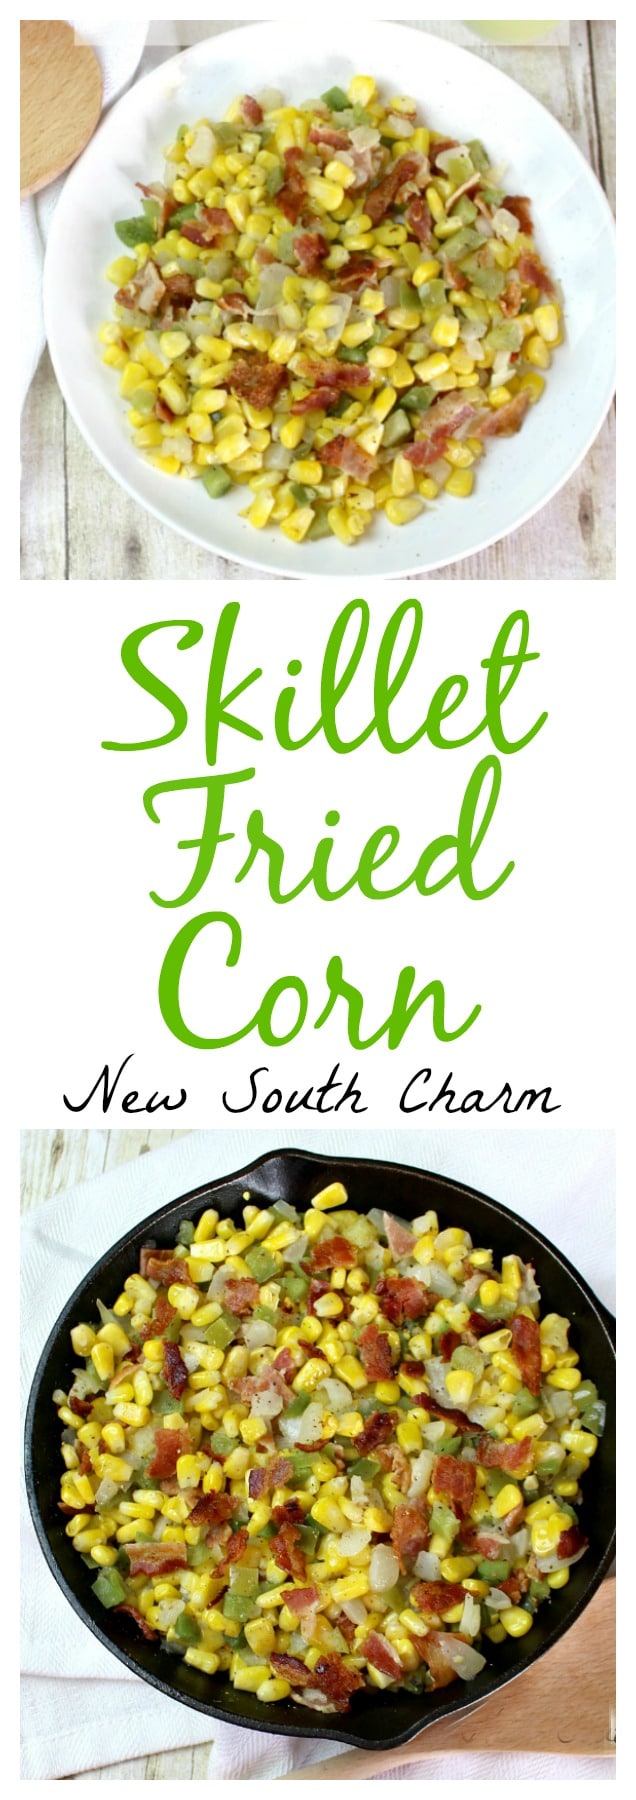 Skillet Fried Corn is easy to make and is packed with lots of great flavors like BACON! This is the perfect side for everything from chicken breasts to hamburgers.